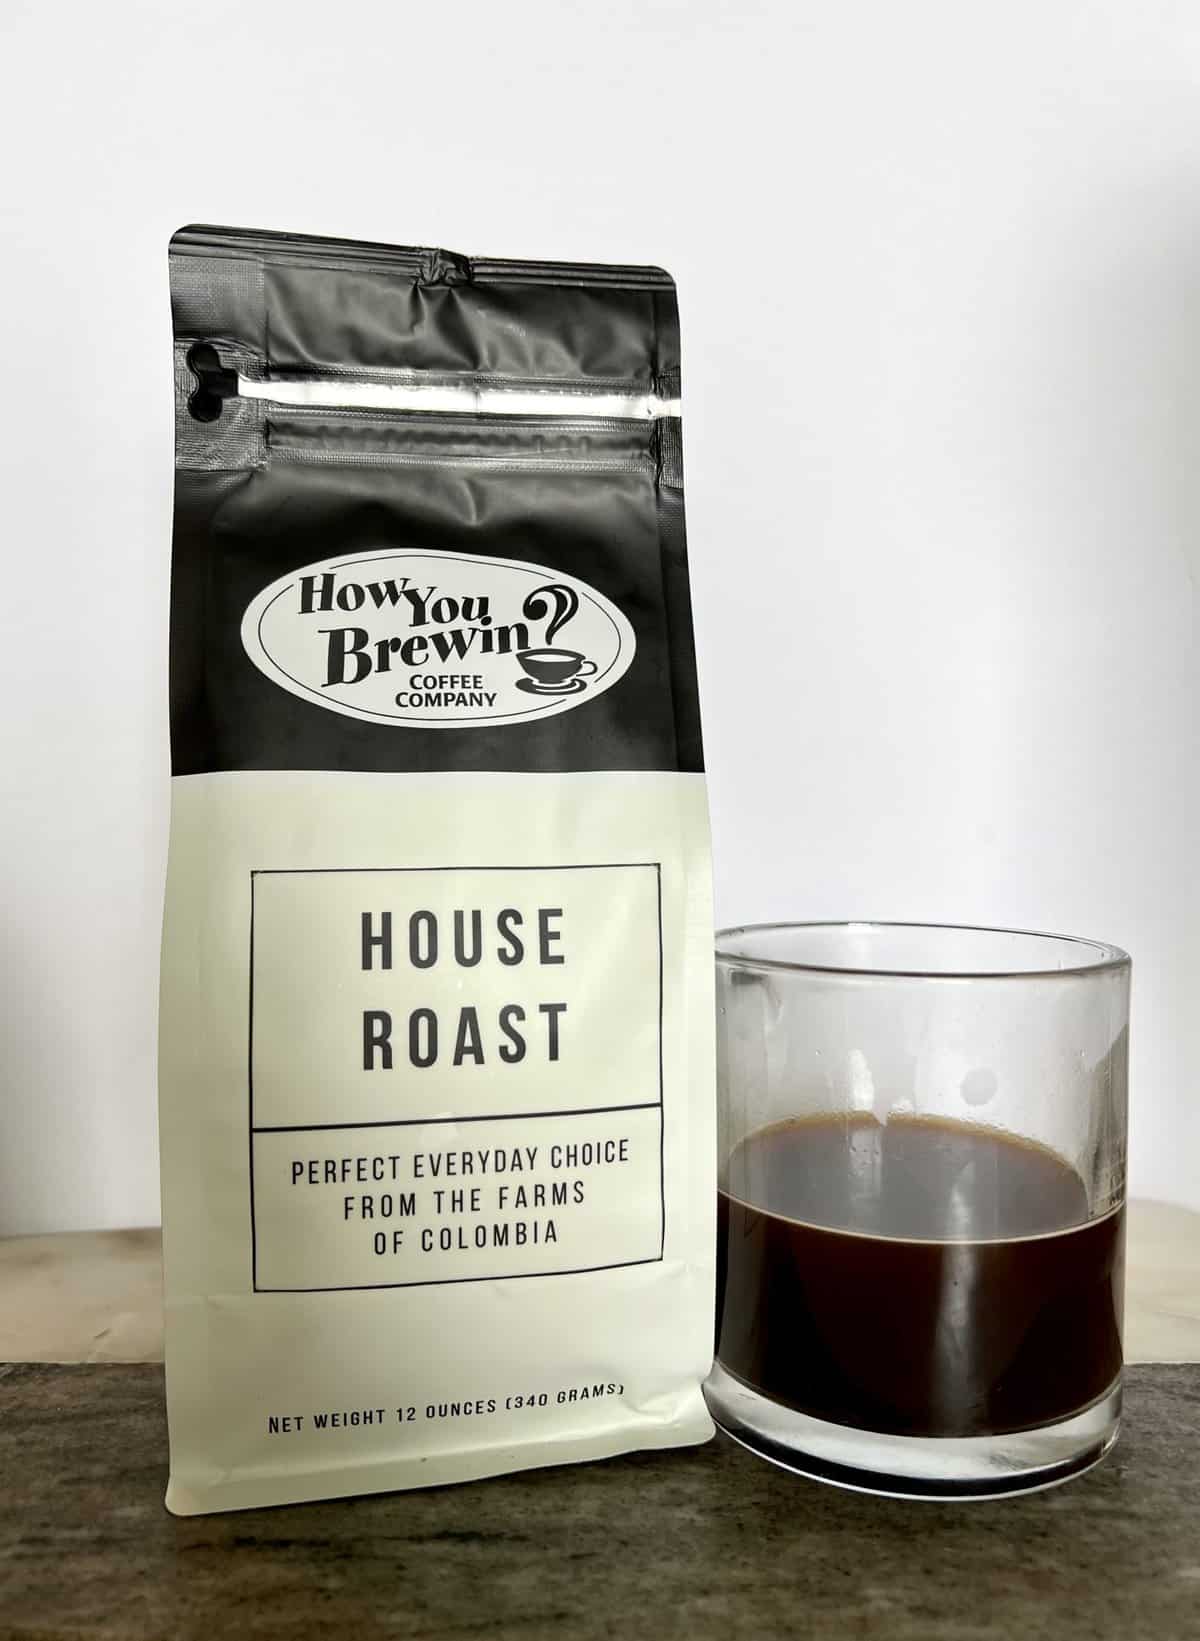 a-package-of-House-Roast-coffee-stands-next-to-a-brewed-cup-of-coffee-scaled